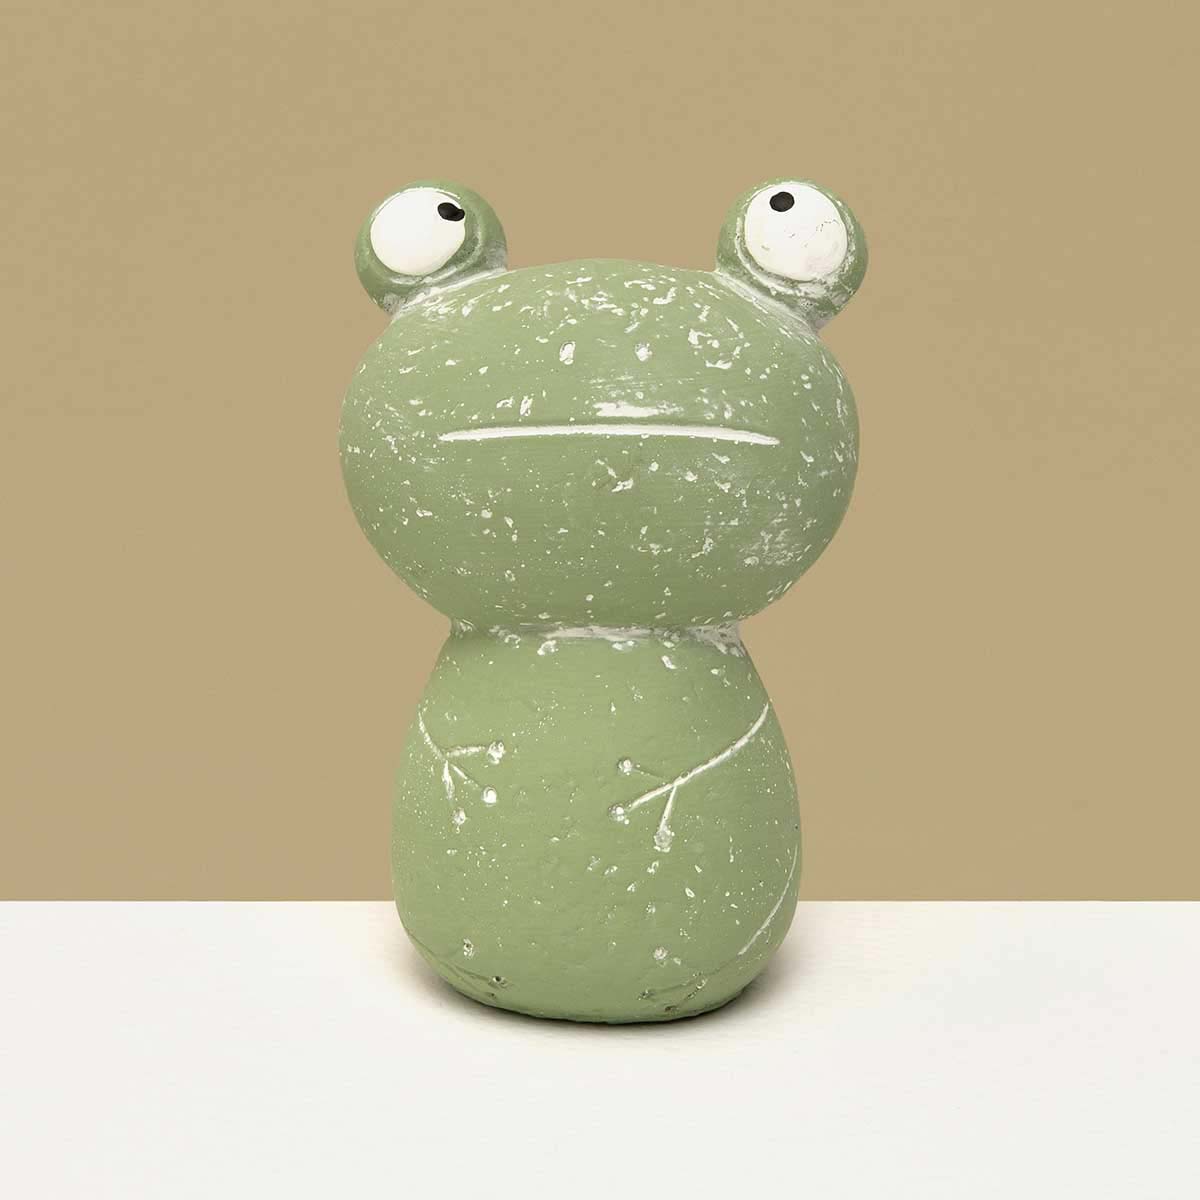 FROG GOOGLY EYE SMALL 3IN X 2.5IN X 4.5IN GREEN/WHITE CONCRETE